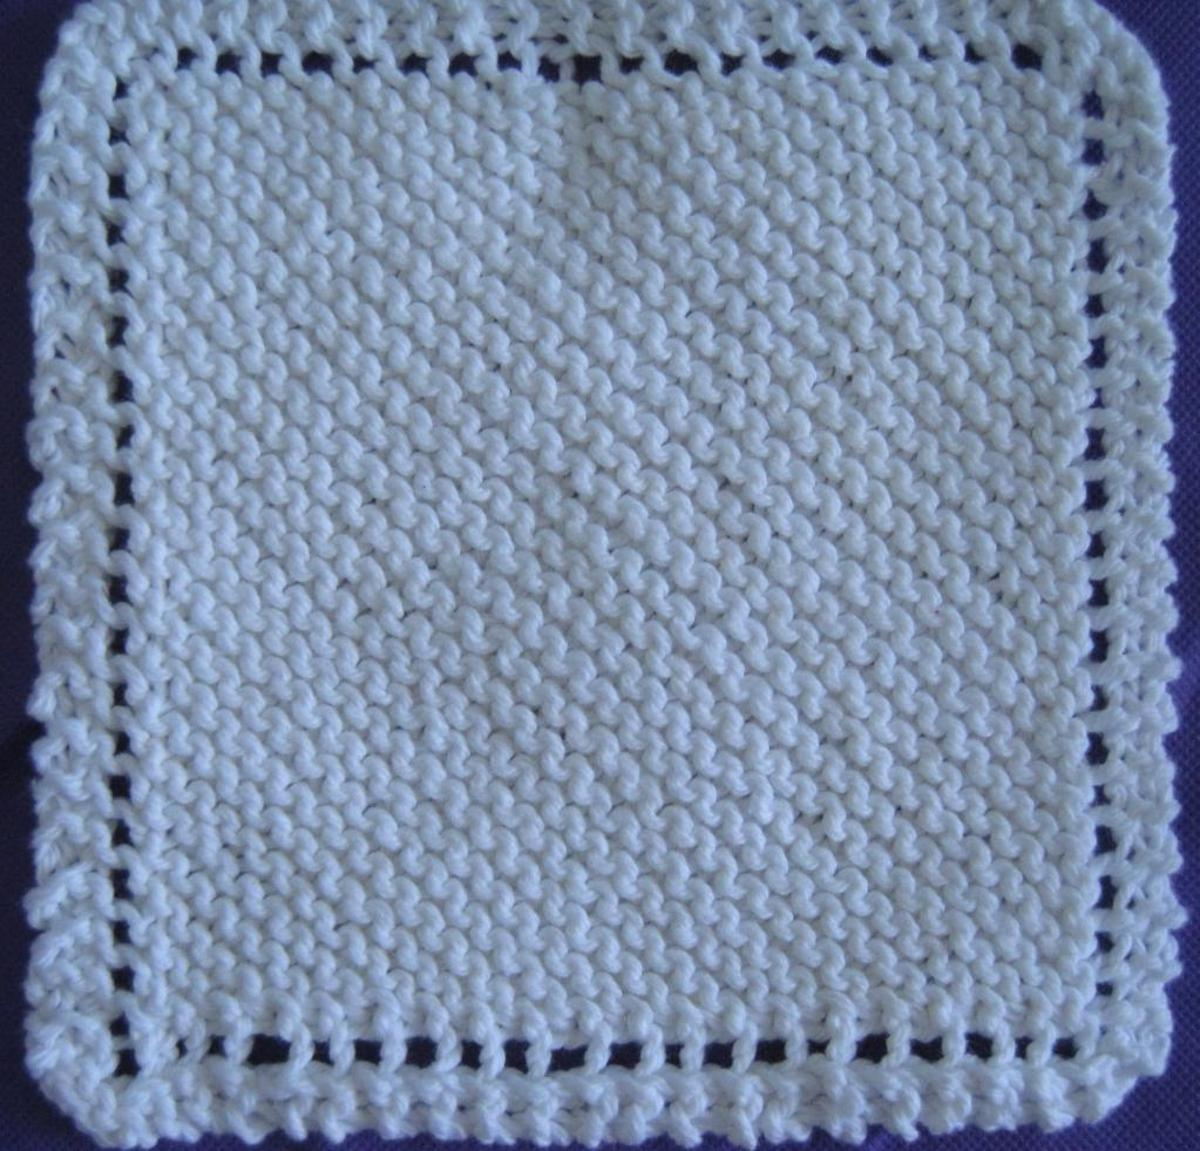 Free Knitted Cotton Dishcloth Patterns The Old Time Favorite Dish Cloth Bluprint